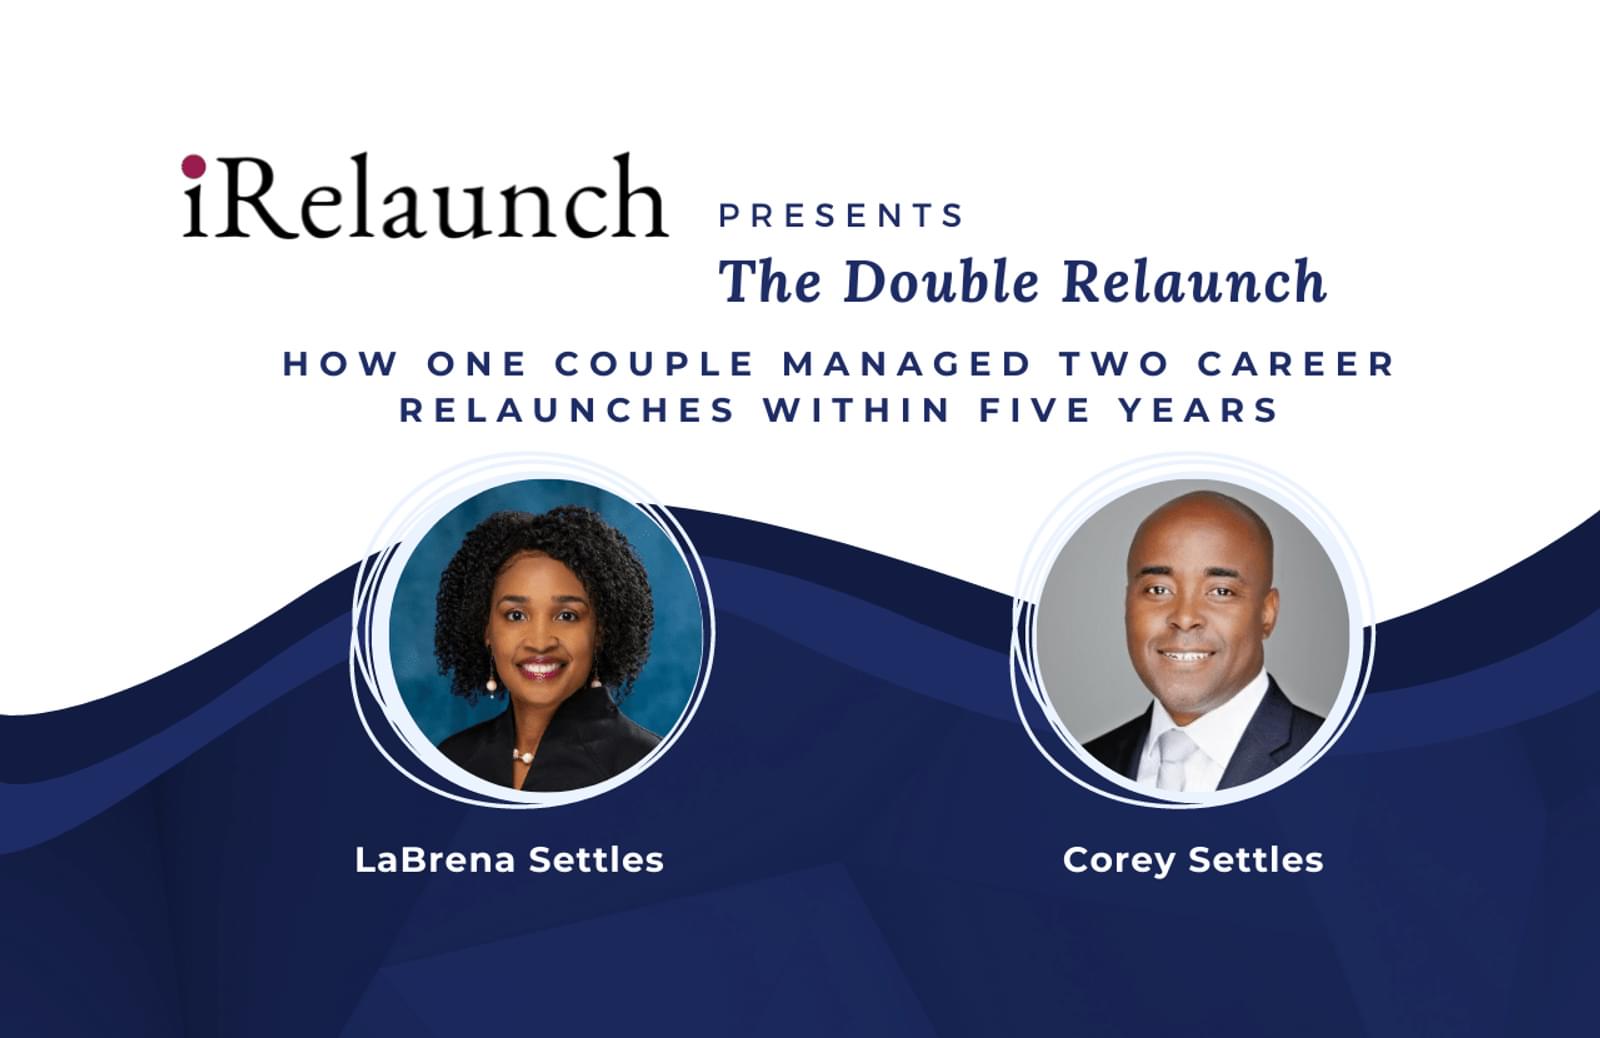 Text reads: iRelaunch Presents The Double Relaunch - How One Couple Managed Two Career Relaunches Within Five Years. LaBrena Settles and Corey Settle's headshots sit below the text.